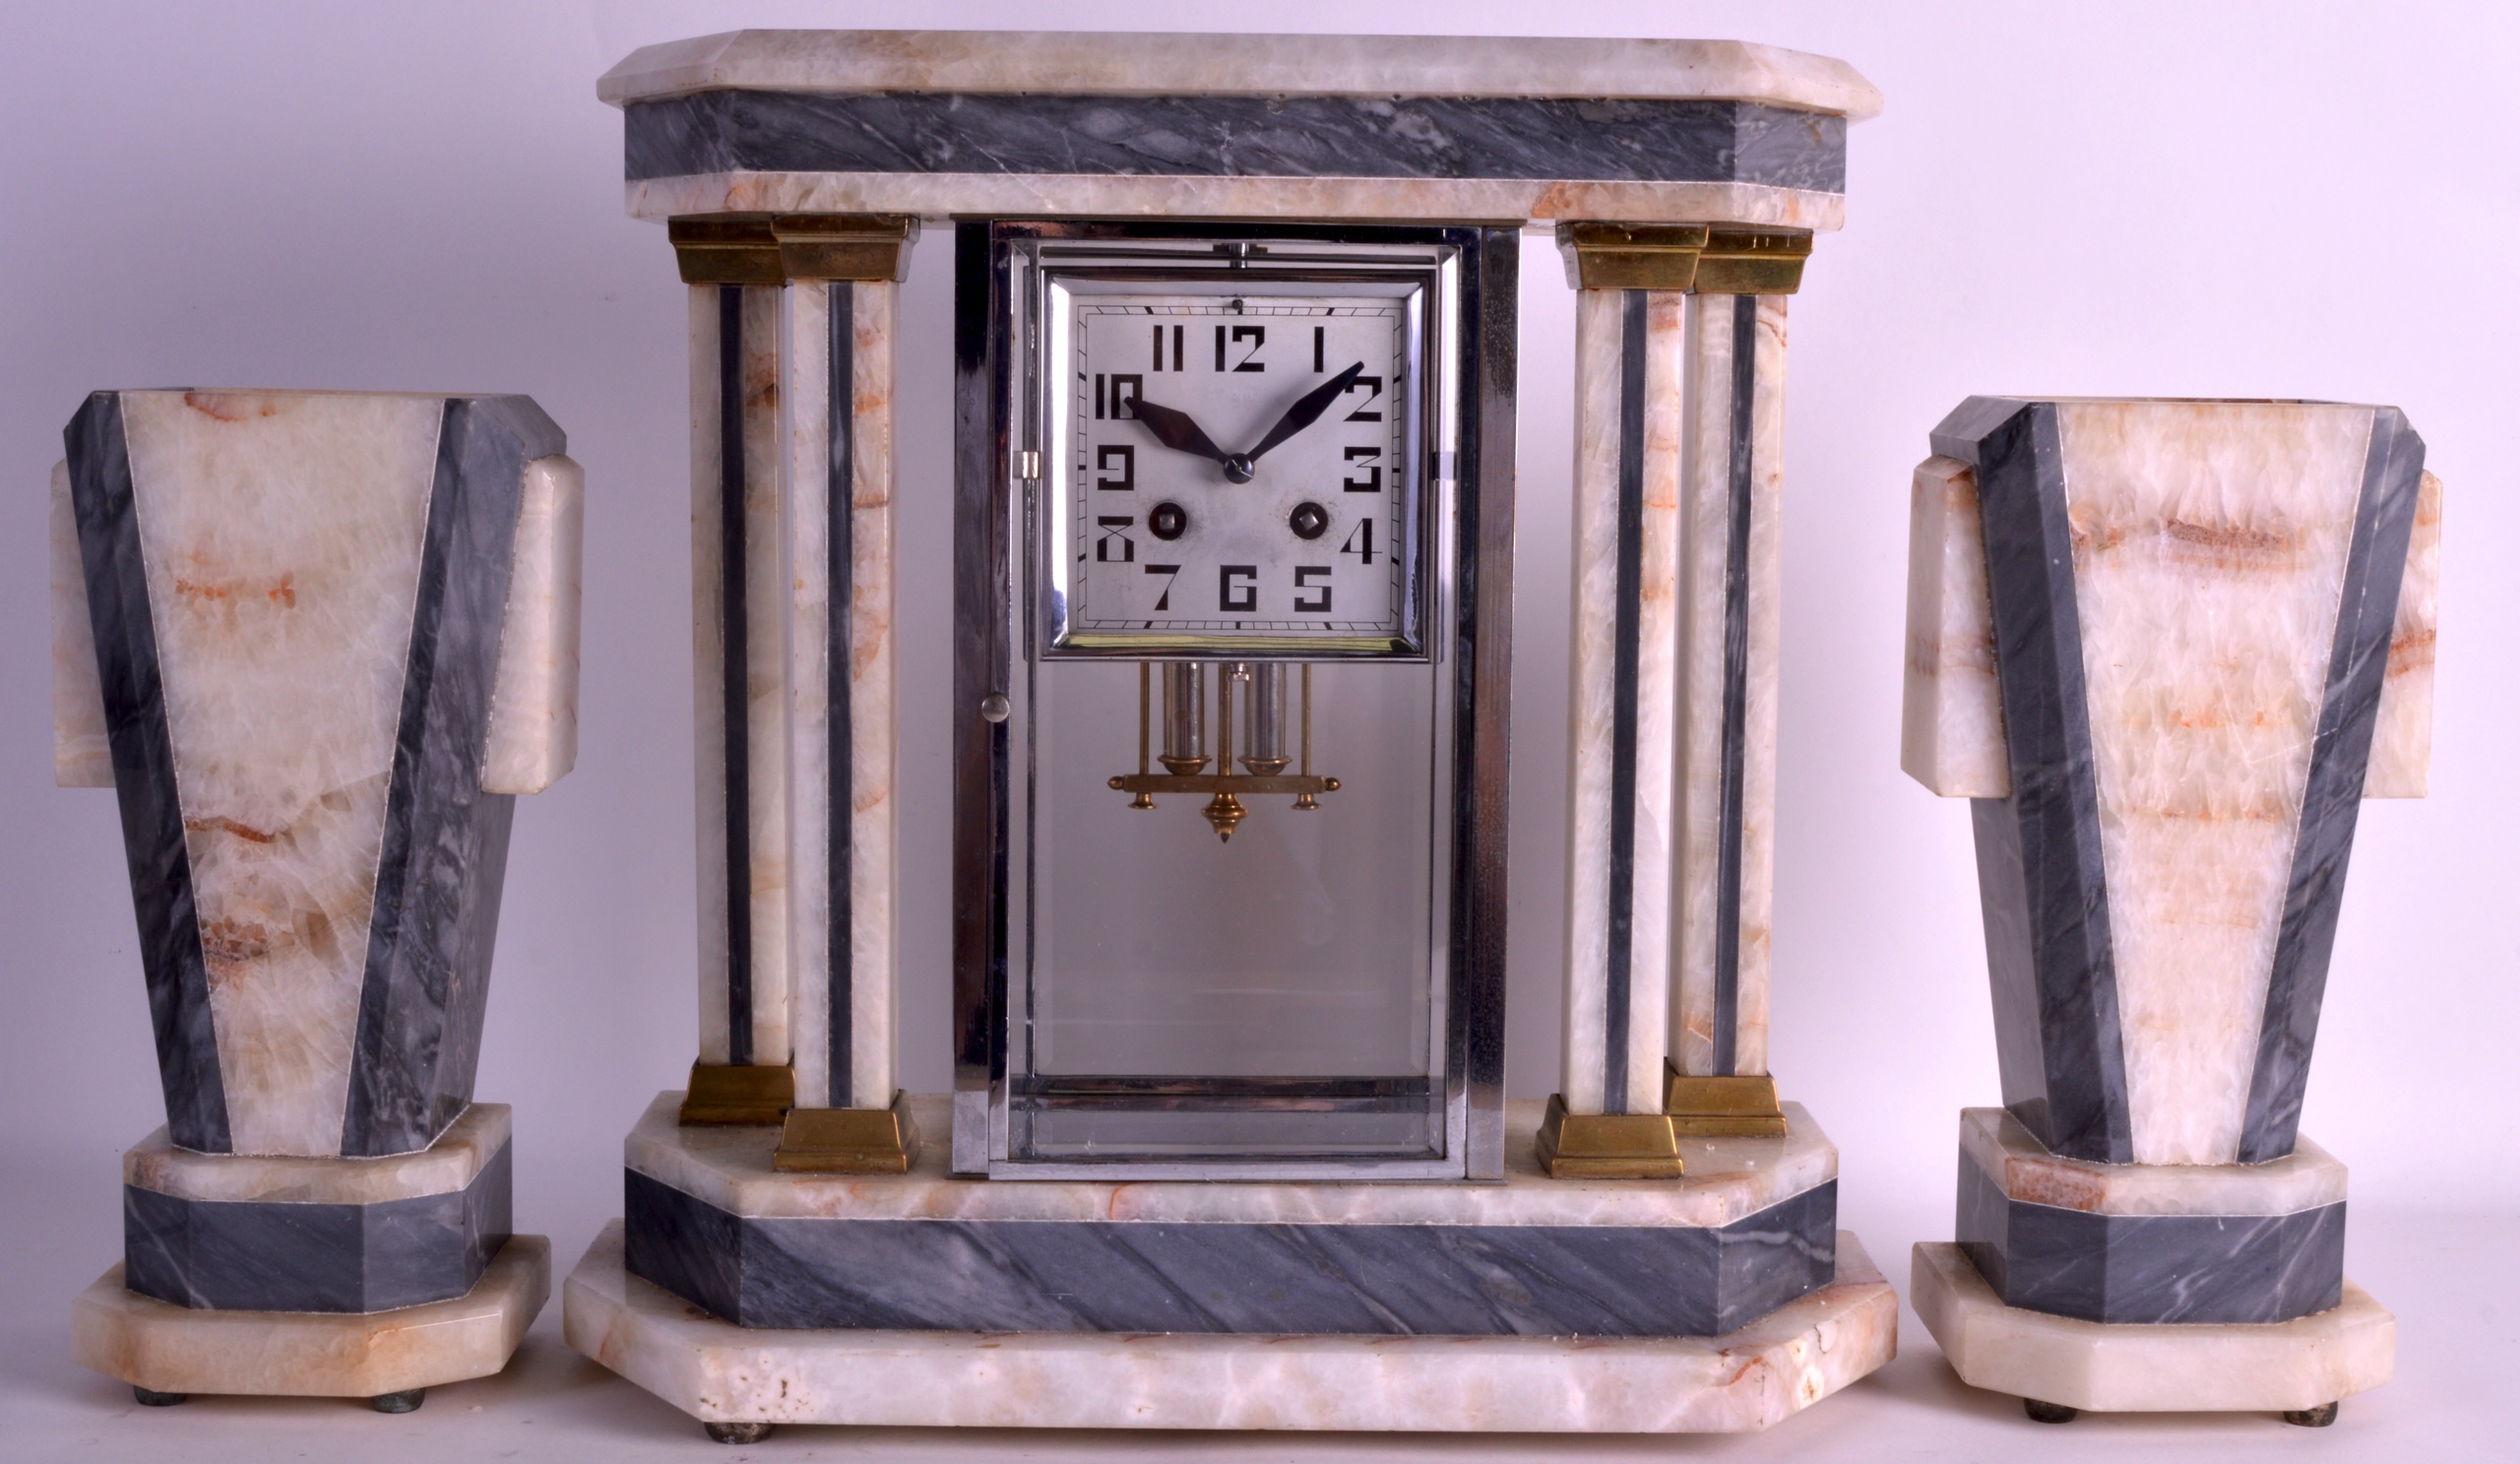 A FRENCH ART DECO CLOCK GARNITURE with square dial and bold numerals. Clock 1ft 4ins high. (3)